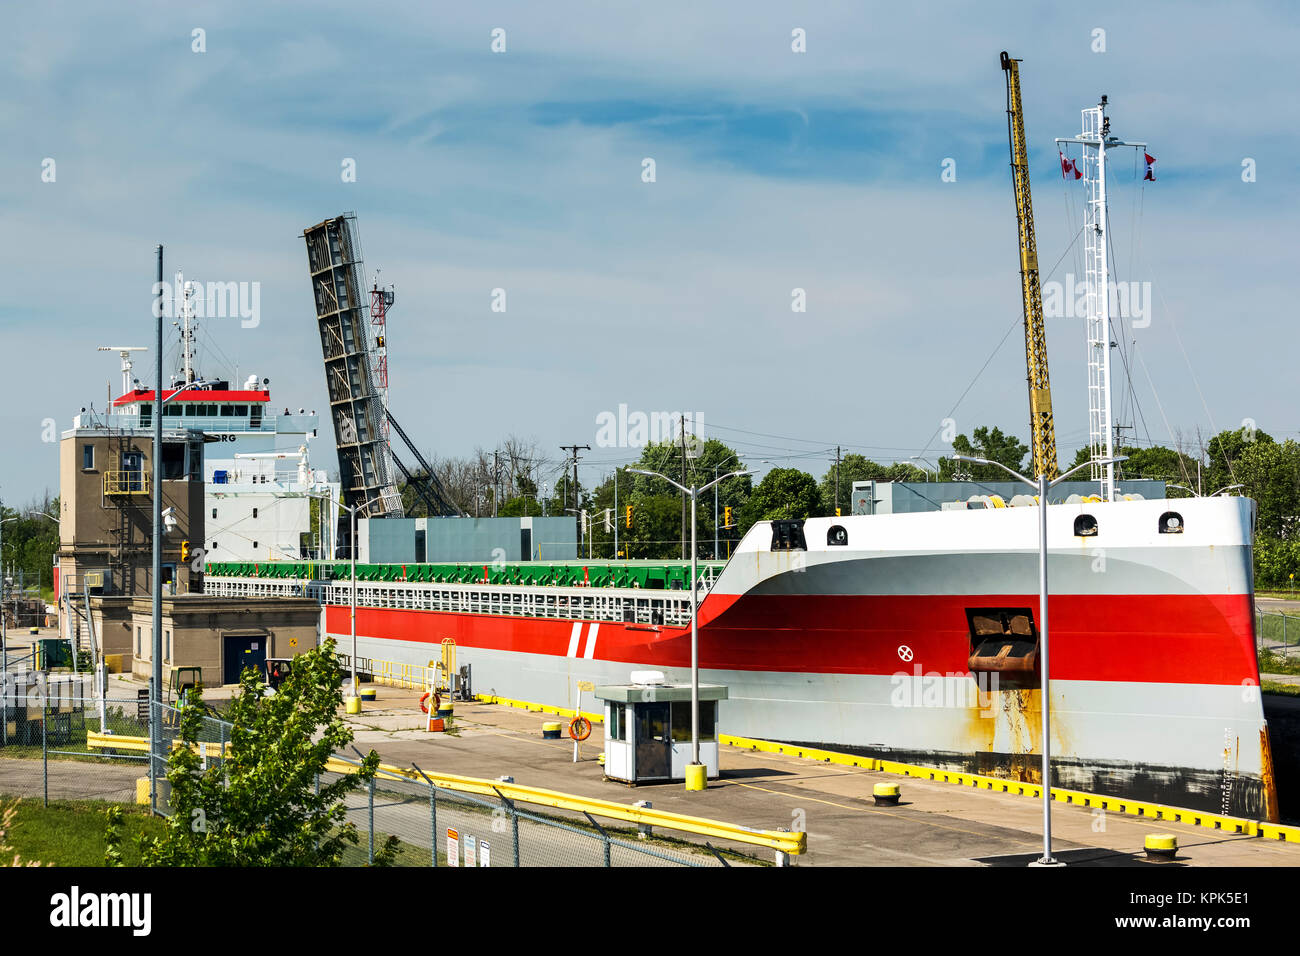 Large laker ship going through canal locks with lifted bridge in the background; Port Colborne, Ontario, Canada Stock Photo